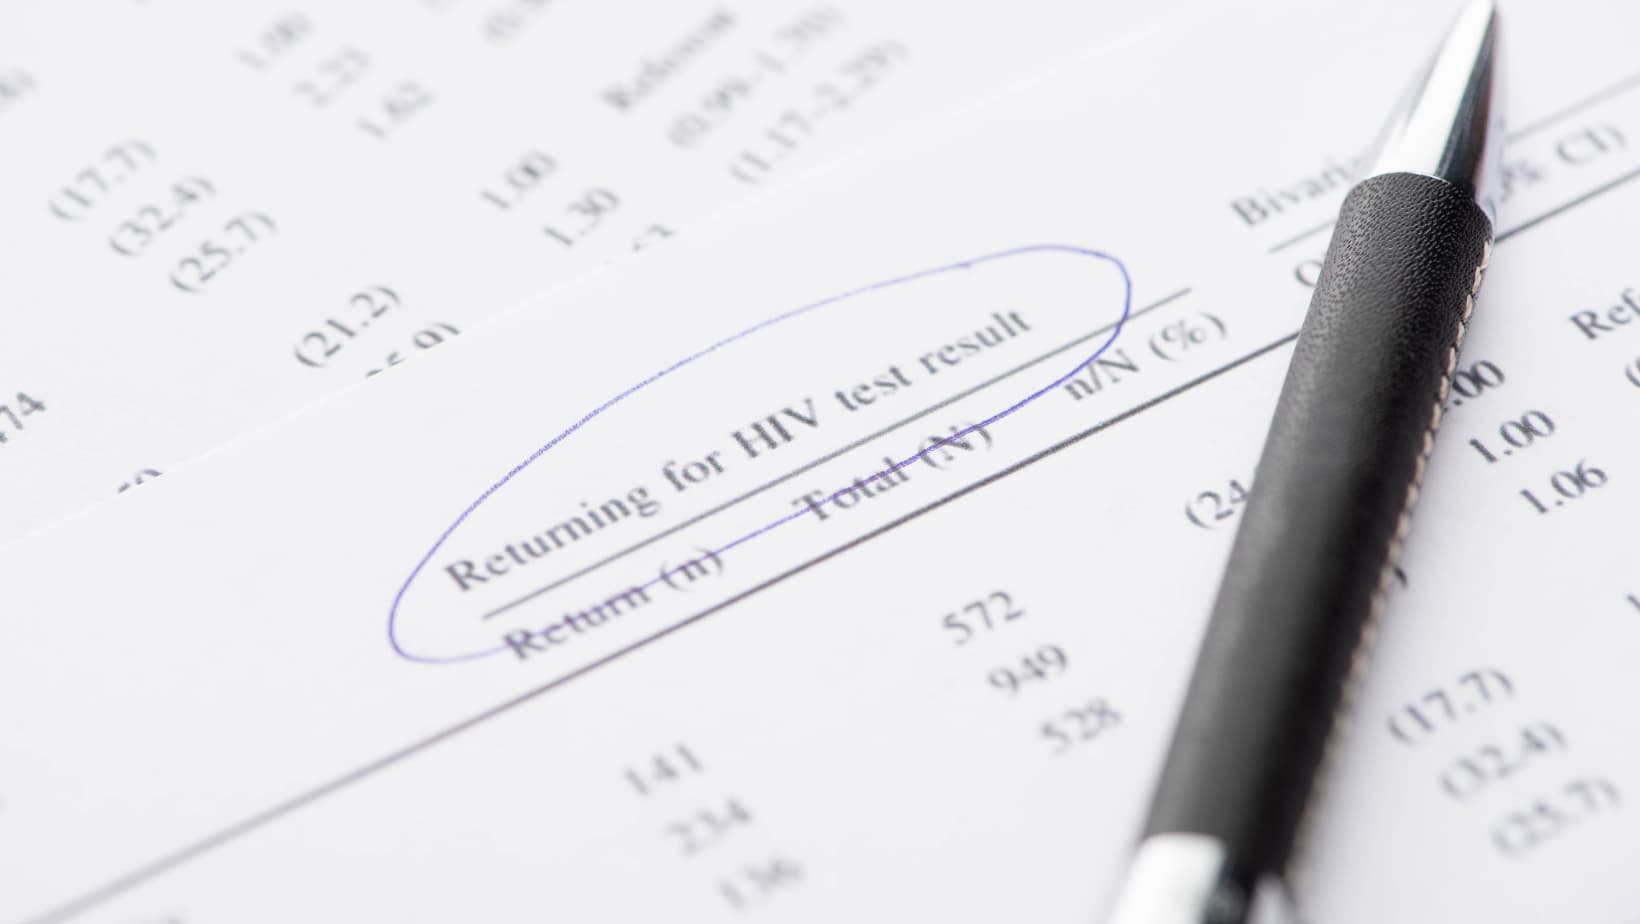 Accuracy of HIV laboratory and rapid tests